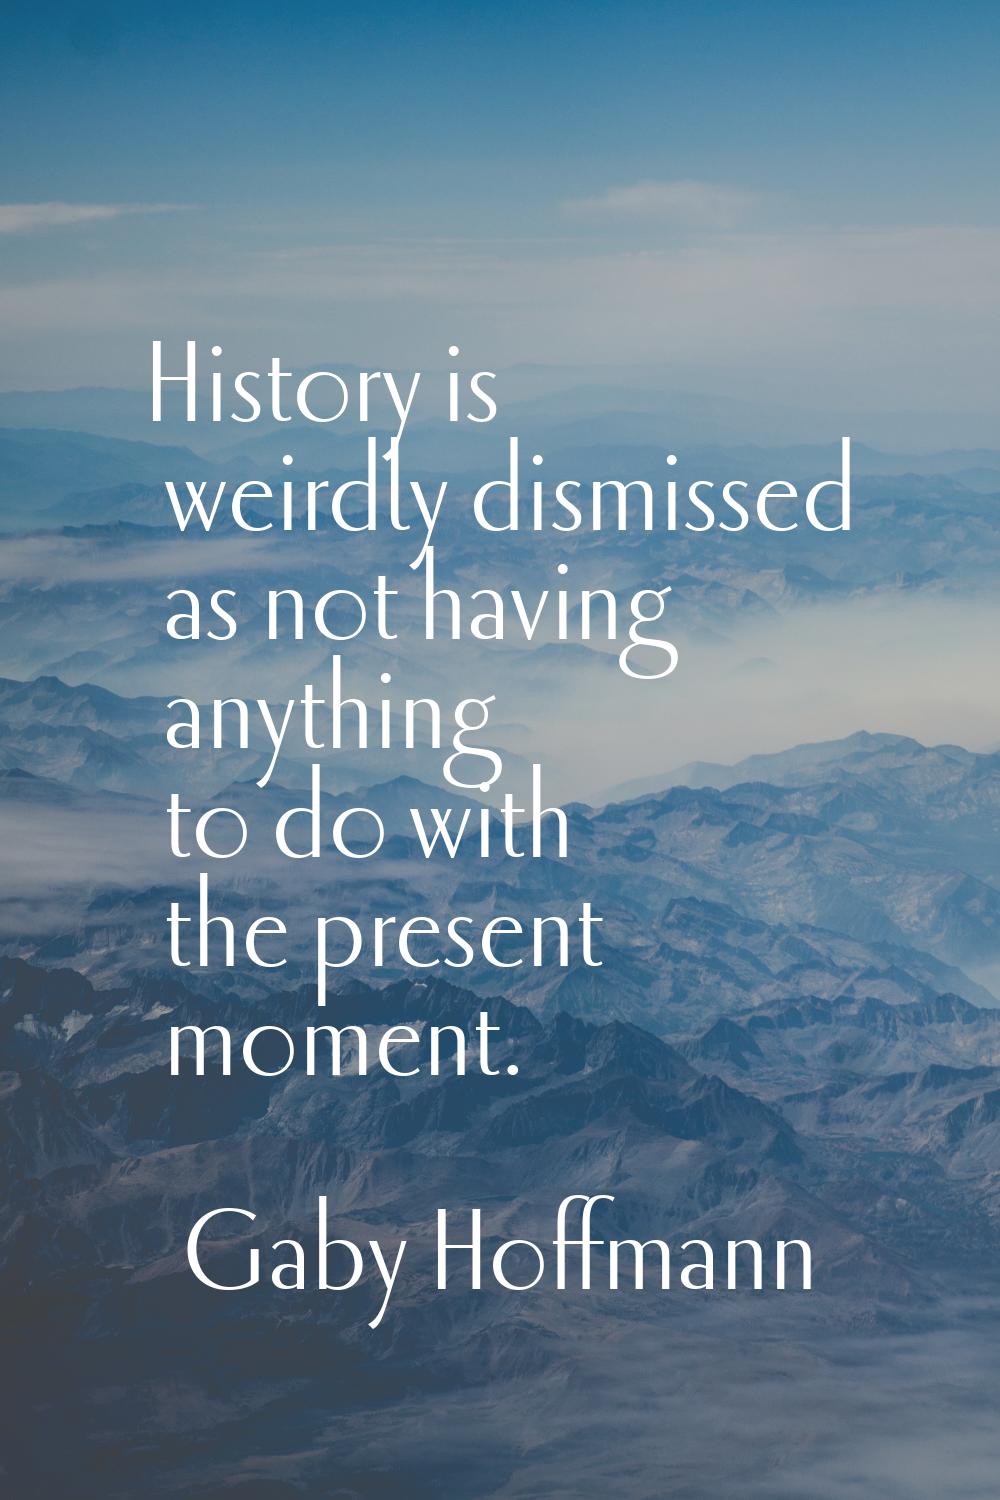 History is weirdly dismissed as not having anything to do with the present moment.